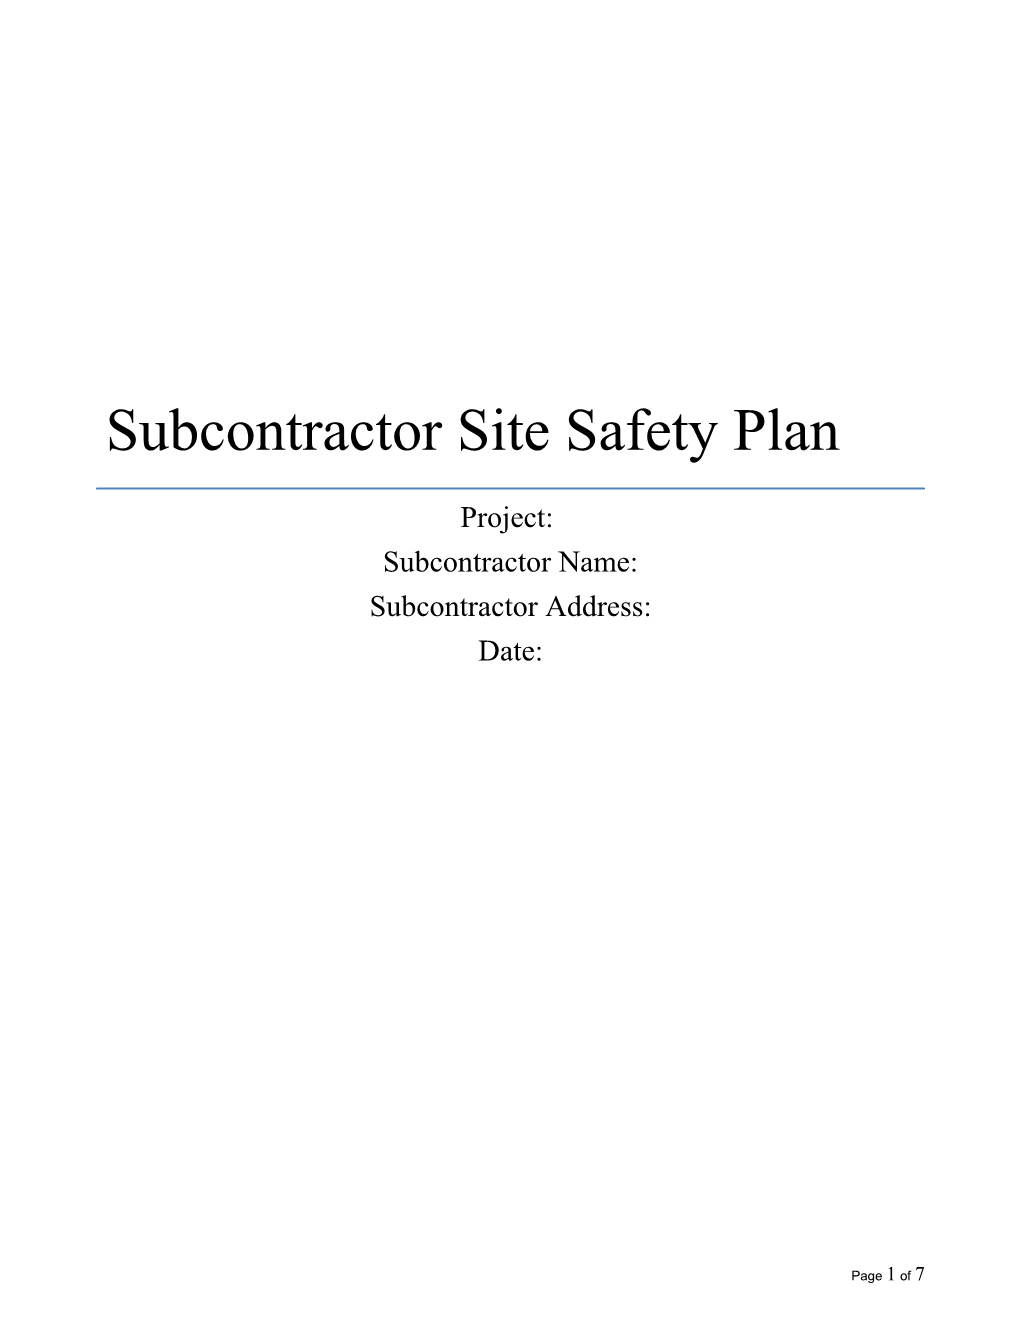 Subcontractor Site Safety Plan